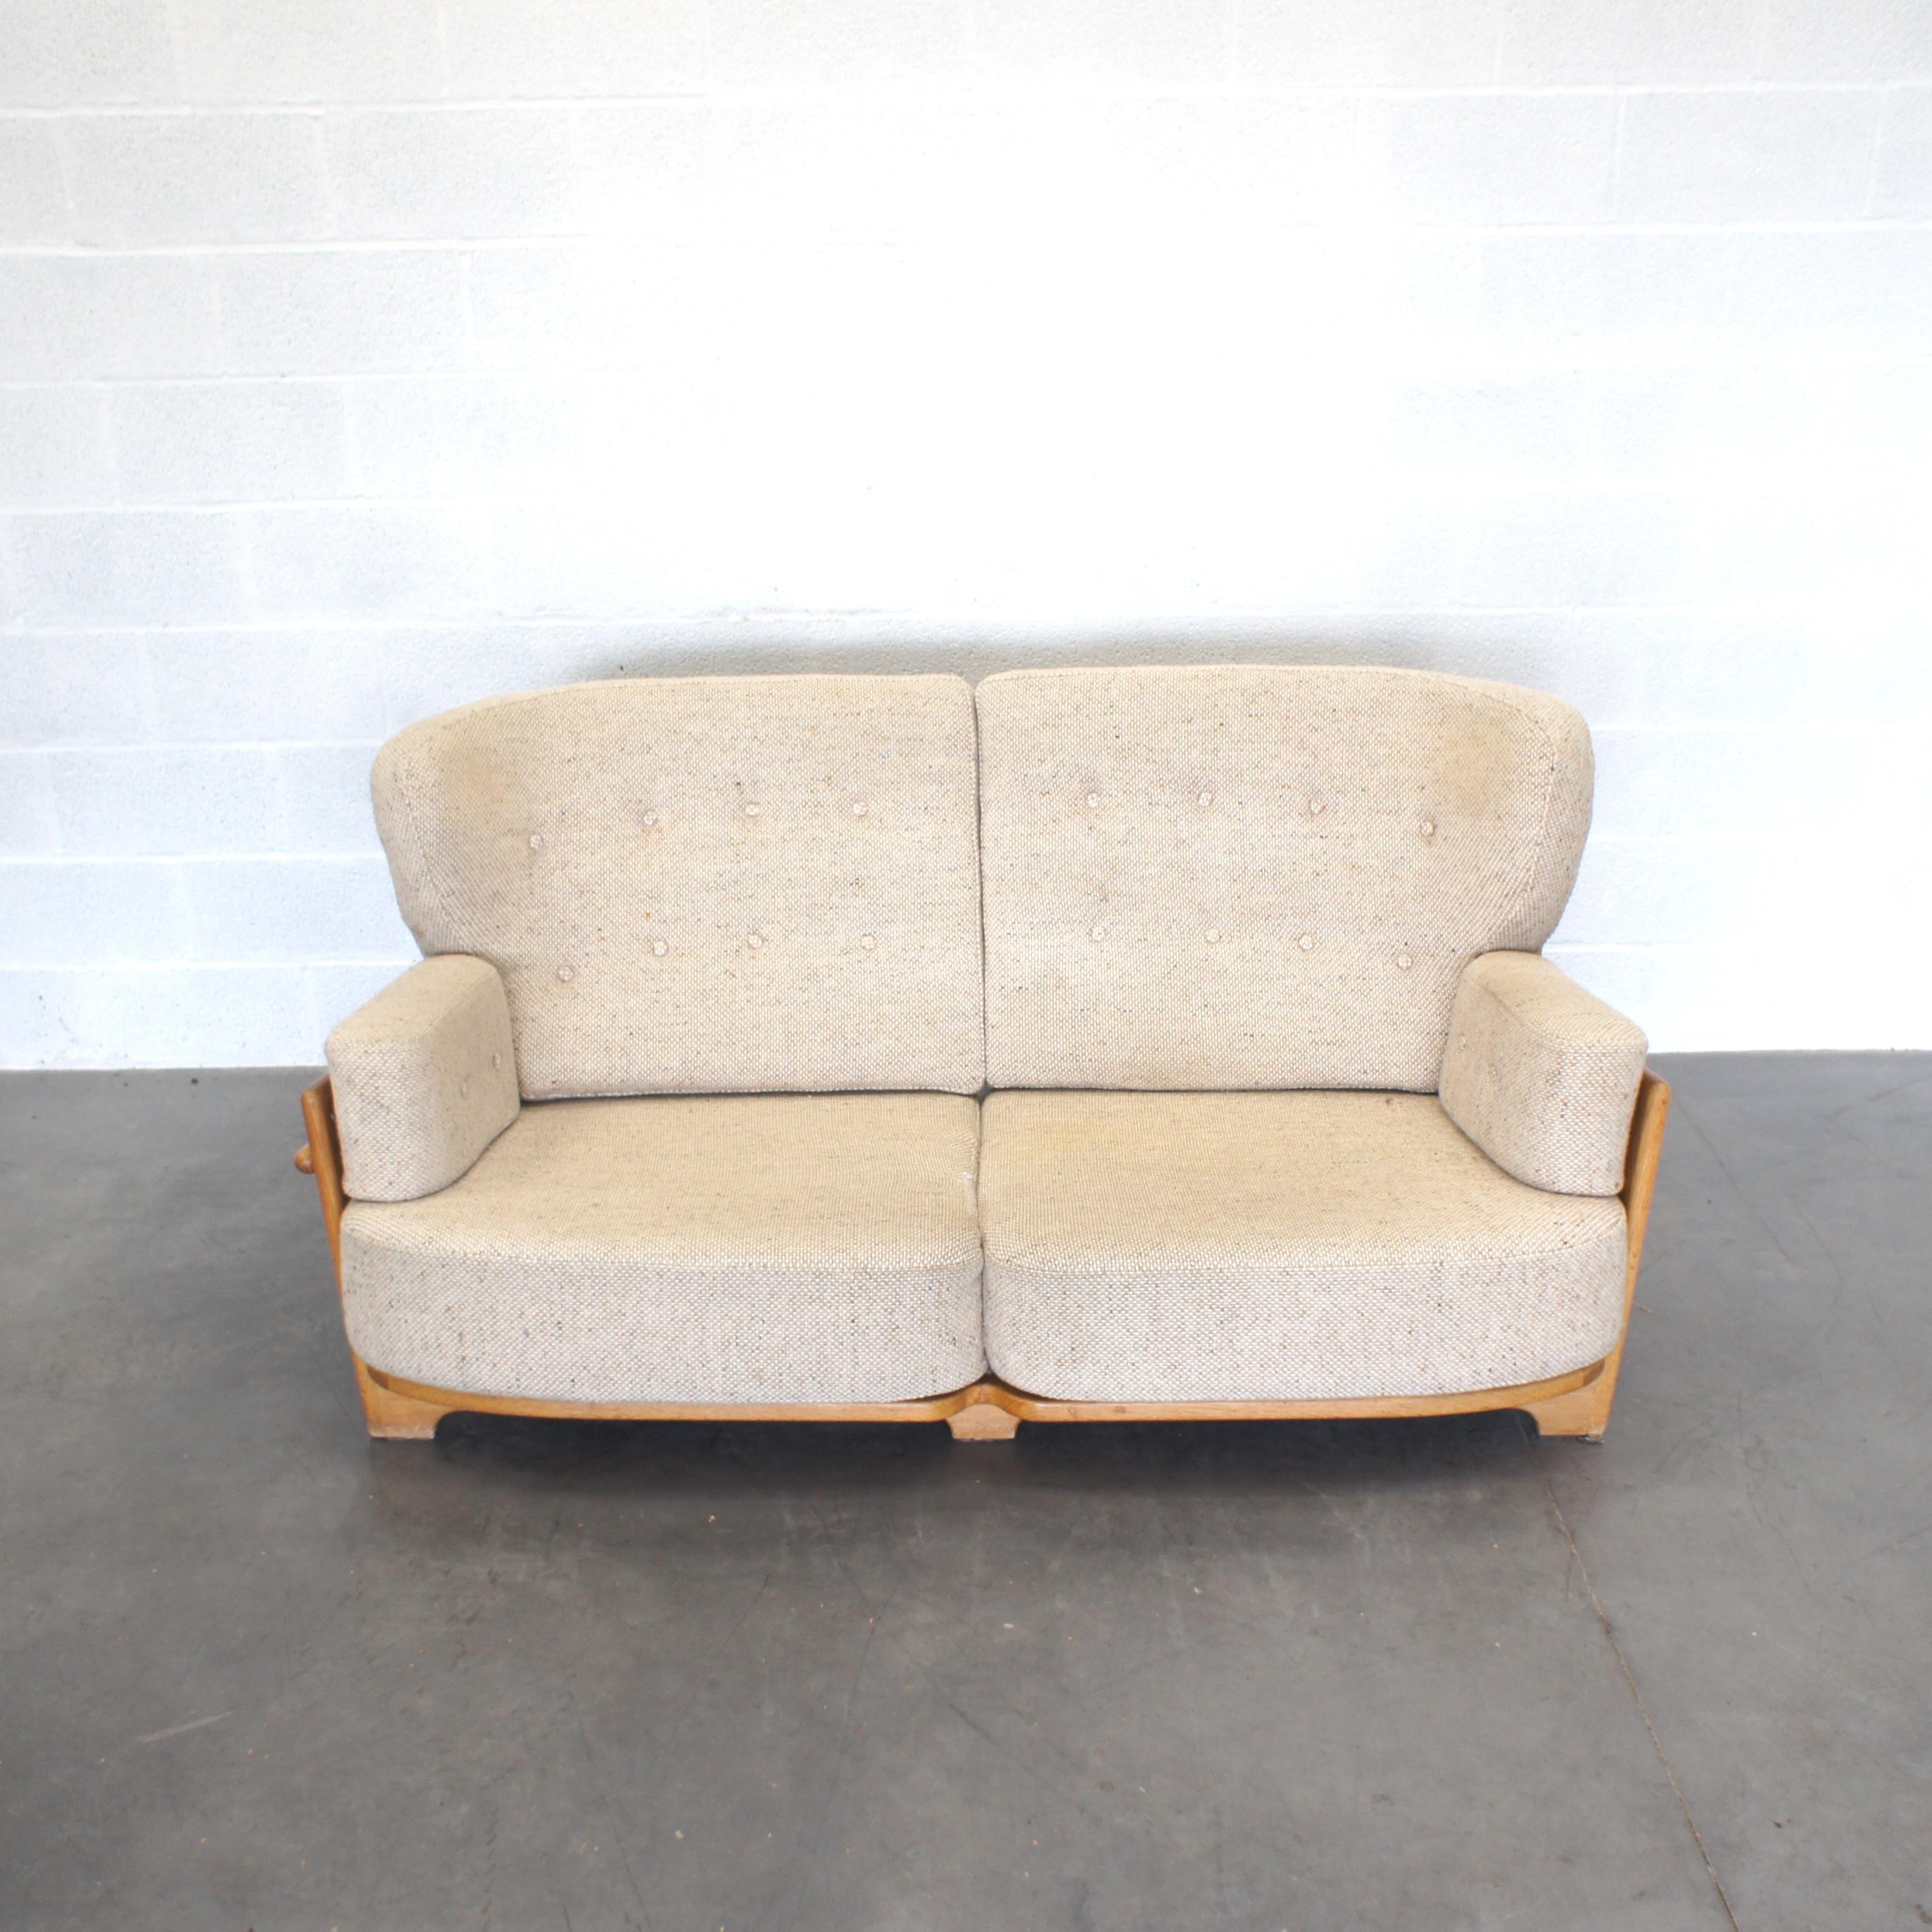 Rare couch designed by Guillerme et Chambron for 